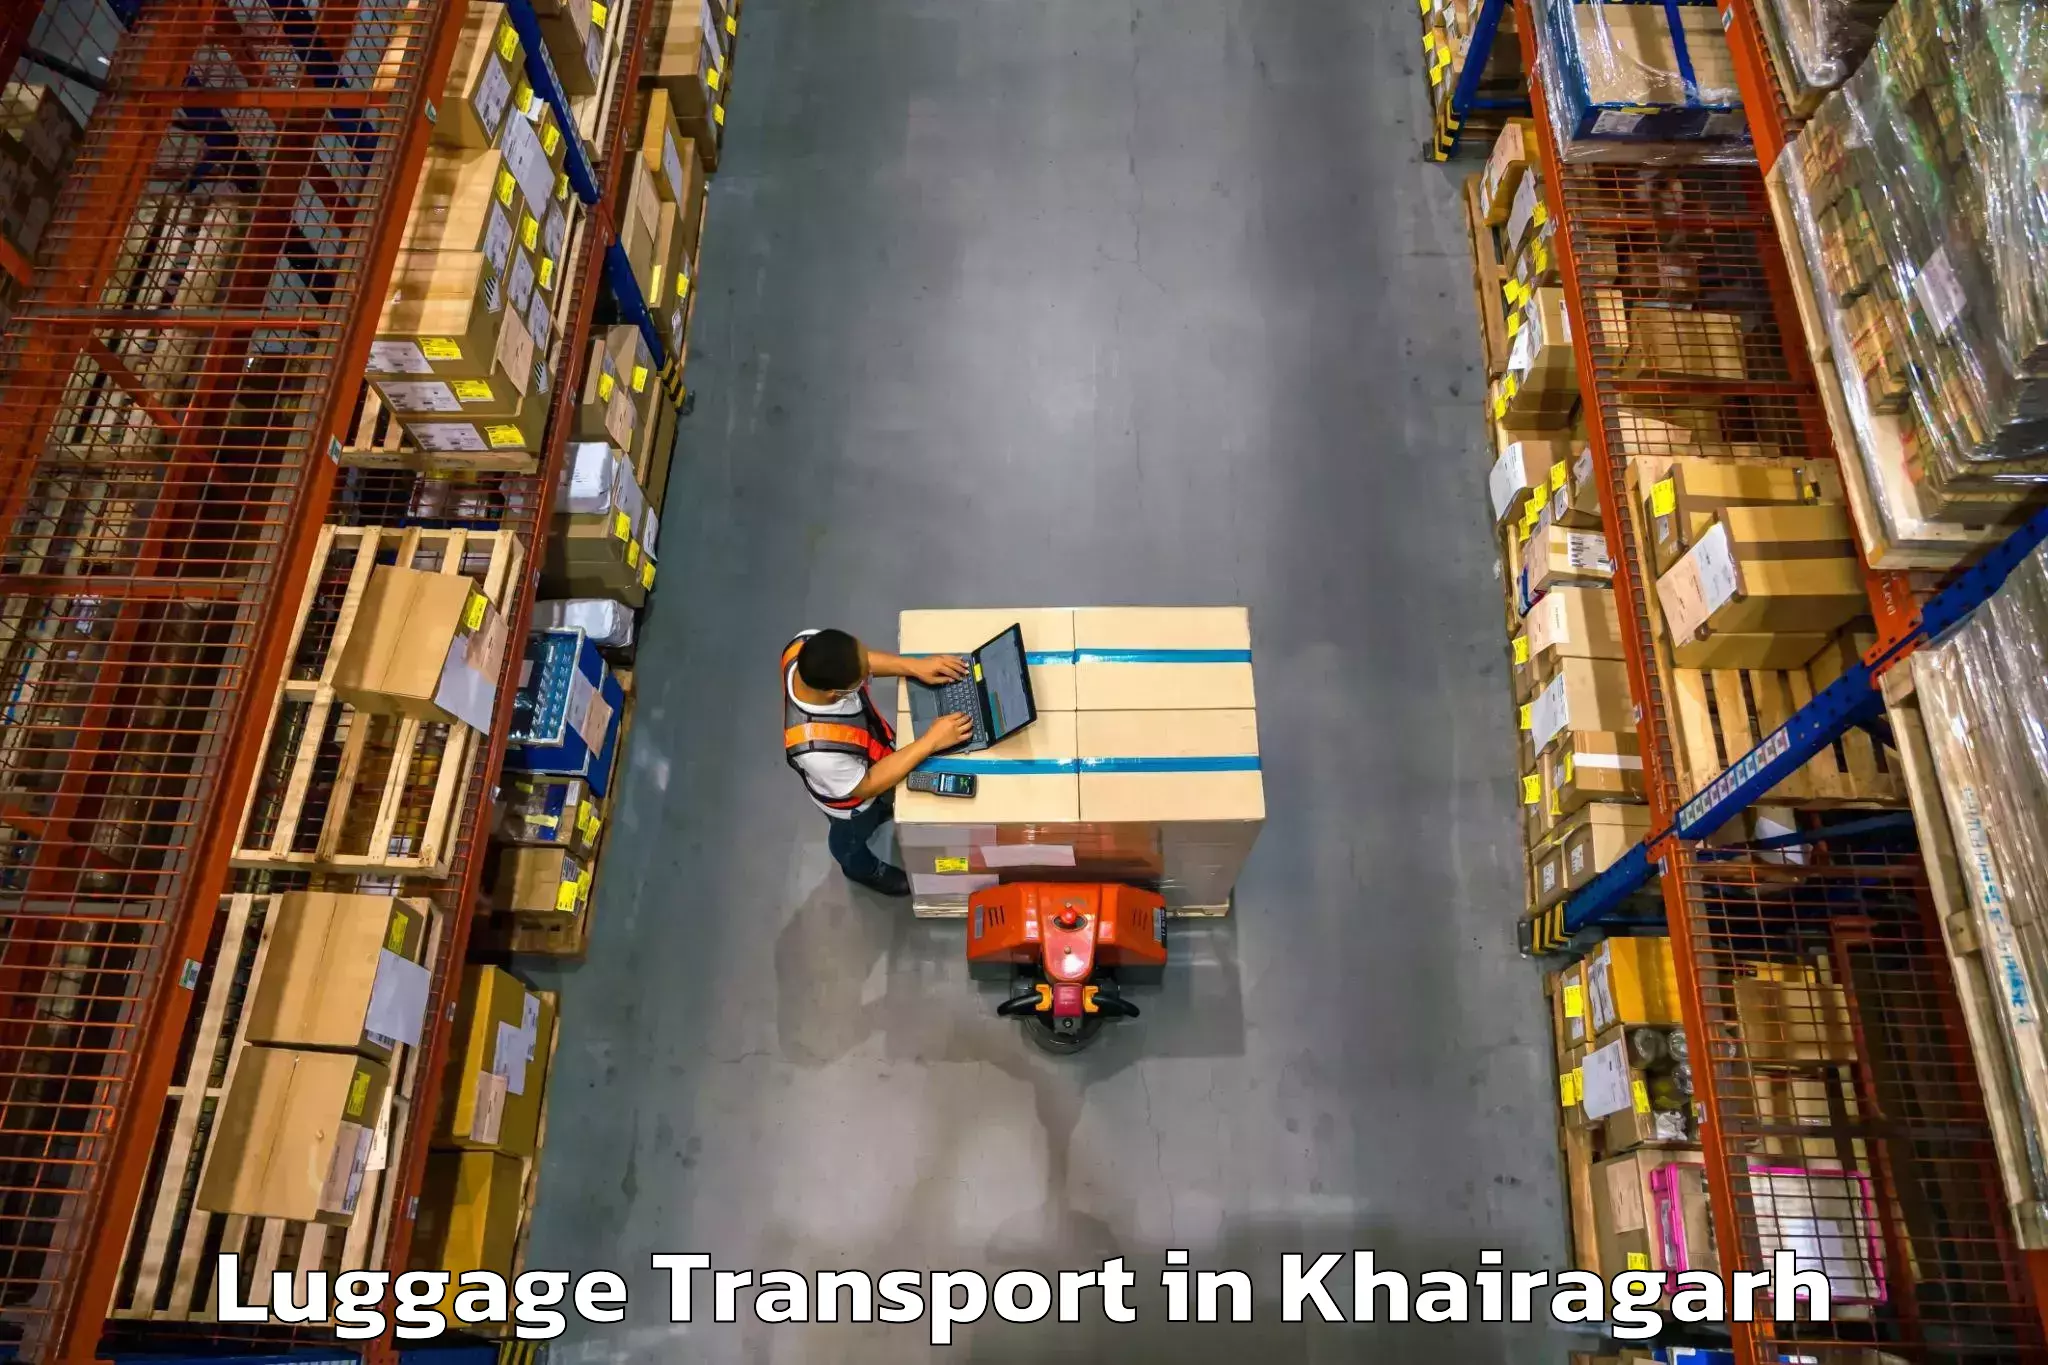 Luggage shipping trends in Khairagarh